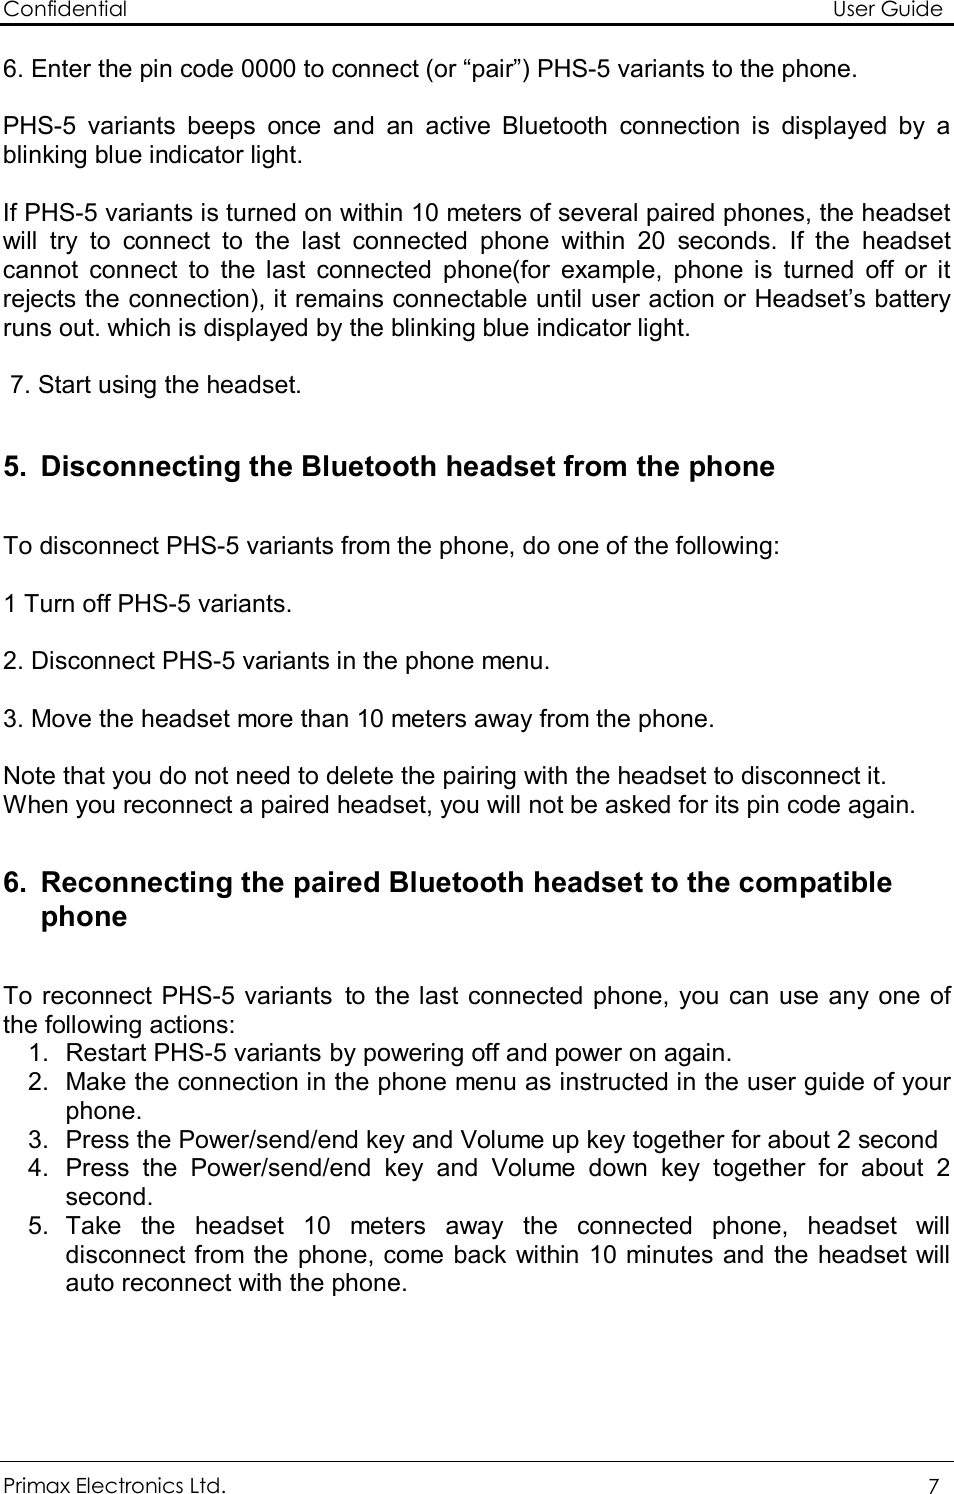 Confidential                                                                                                          User Guide Primax Electronics Ltd.  7  6. Enter the pin code 0000 to connect (or “pair”) PHS-5 variants to the phone.   PHS-5 variants beeps once and an active Bluetooth connection is displayed by a blinking blue indicator light.  If PHS-5 variants is turned on within 10 meters of several paired phones, the headset will try to connect to the last connected phone within 20 seconds. If the headset  cannot connect to the last connected phone(for example, phone is turned off or it rejects the connection), it remains connectable until user action or Headset’s battery runs out. which is displayed by the blinking blue indicator light.   7. Start using the headset.  5. Disconnecting the Bluetooth headset from the phone  To disconnect PHS-5 variants from the phone, do one of the following:  1 Turn off PHS-5 variants.  2. Disconnect PHS-5 variants in the phone menu.  3. Move the headset more than 10 meters away from the phone.  Note that you do not need to delete the pairing with the headset to disconnect it. When you reconnect a paired headset, you will not be asked for its pin code again.  6. Reconnecting the paired Bluetooth headset to the compatible phone  To reconnect PHS-5 variants to the last connected phone, you can use any one of the following actions: 1. Restart PHS-5 variants by powering off and power on again. 2. Make the connection in the phone menu as instructed in the user guide of your phone. 3. Press the Power/send/end key and Volume up key together for about 2 second 4. Press the Power/send/end key and Volume down key together for about 2 second. 5. Take the headset 10 meters away the connected phone, headset will disconnect from the phone, come back within 10 minutes and the headset will auto reconnect with the phone.    